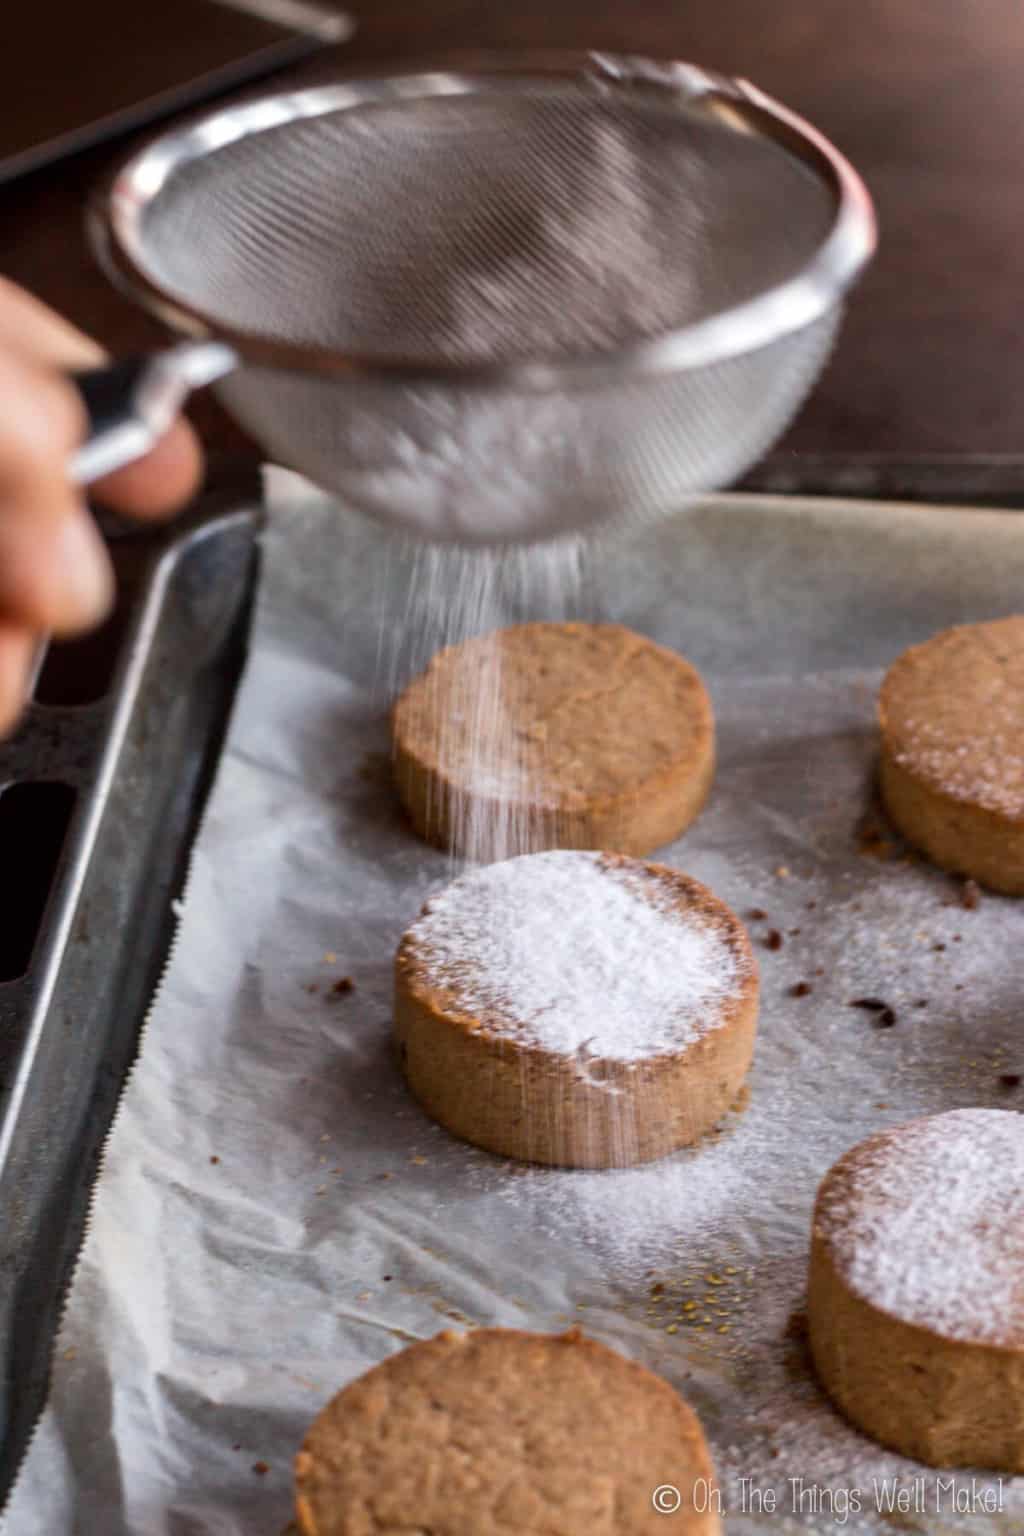 Close up of a metal strainer filled with powdered sugar being sprinkled on freshly baked mantecados and polvorones.